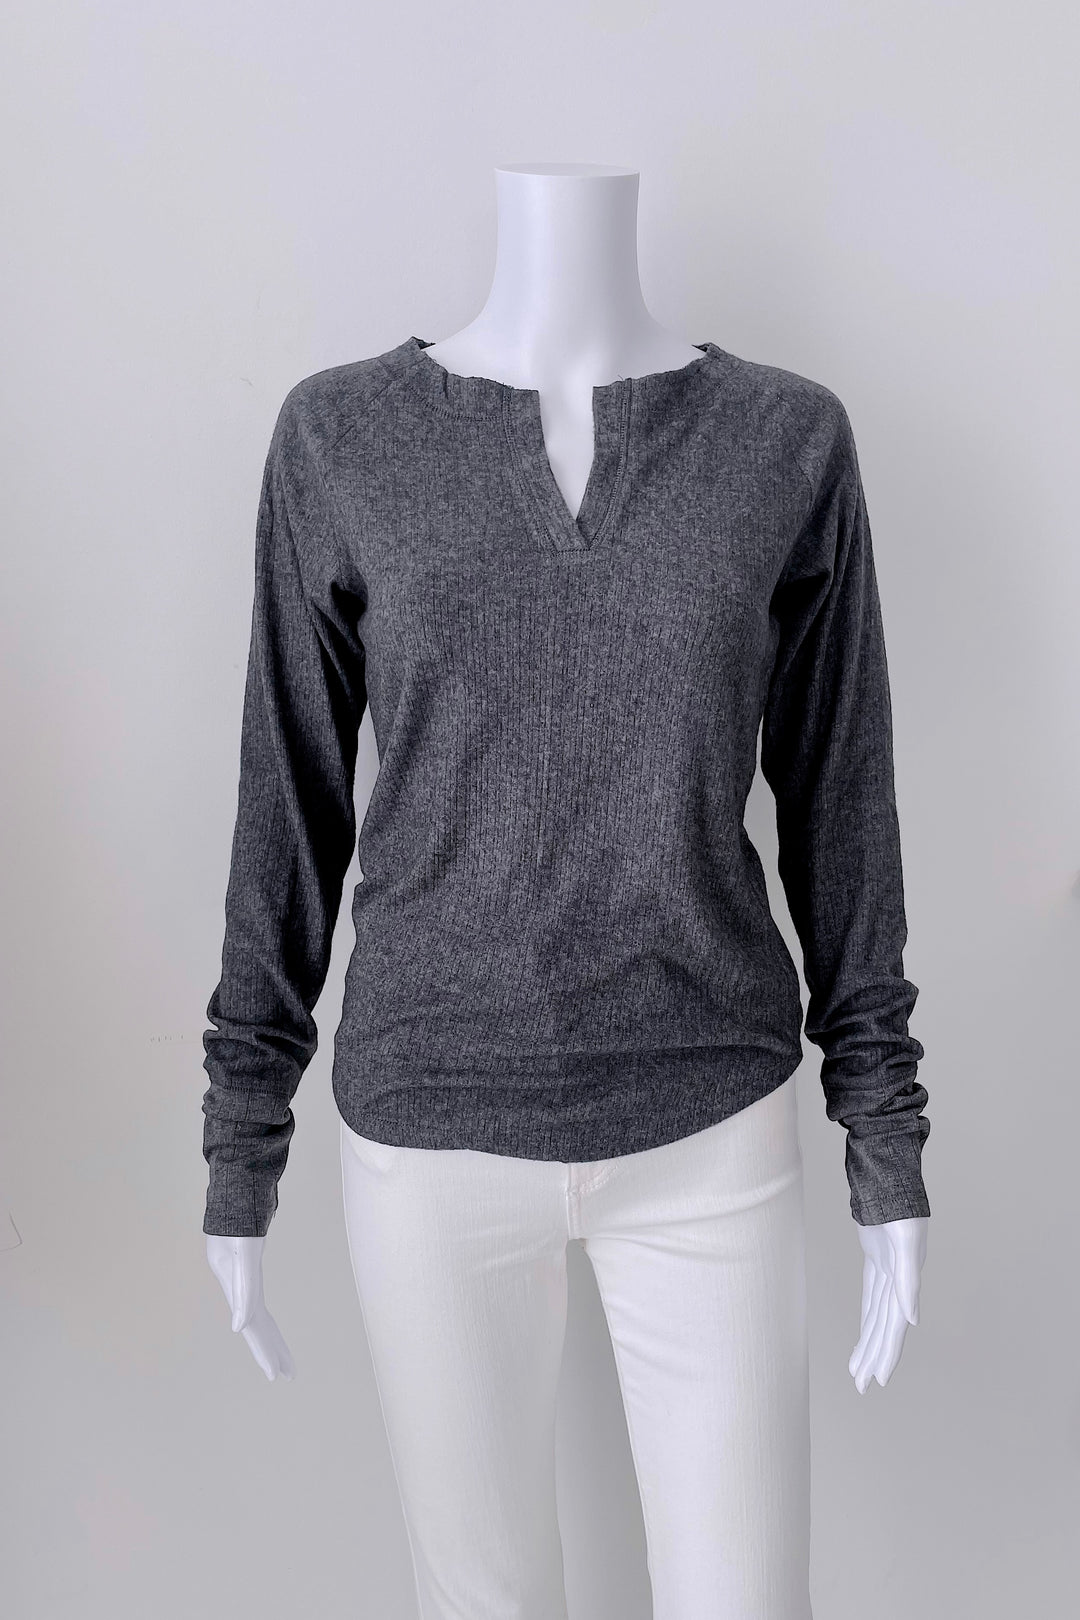 LOVELY DAY LAYERING KNIT TOP IN CHARCOAL